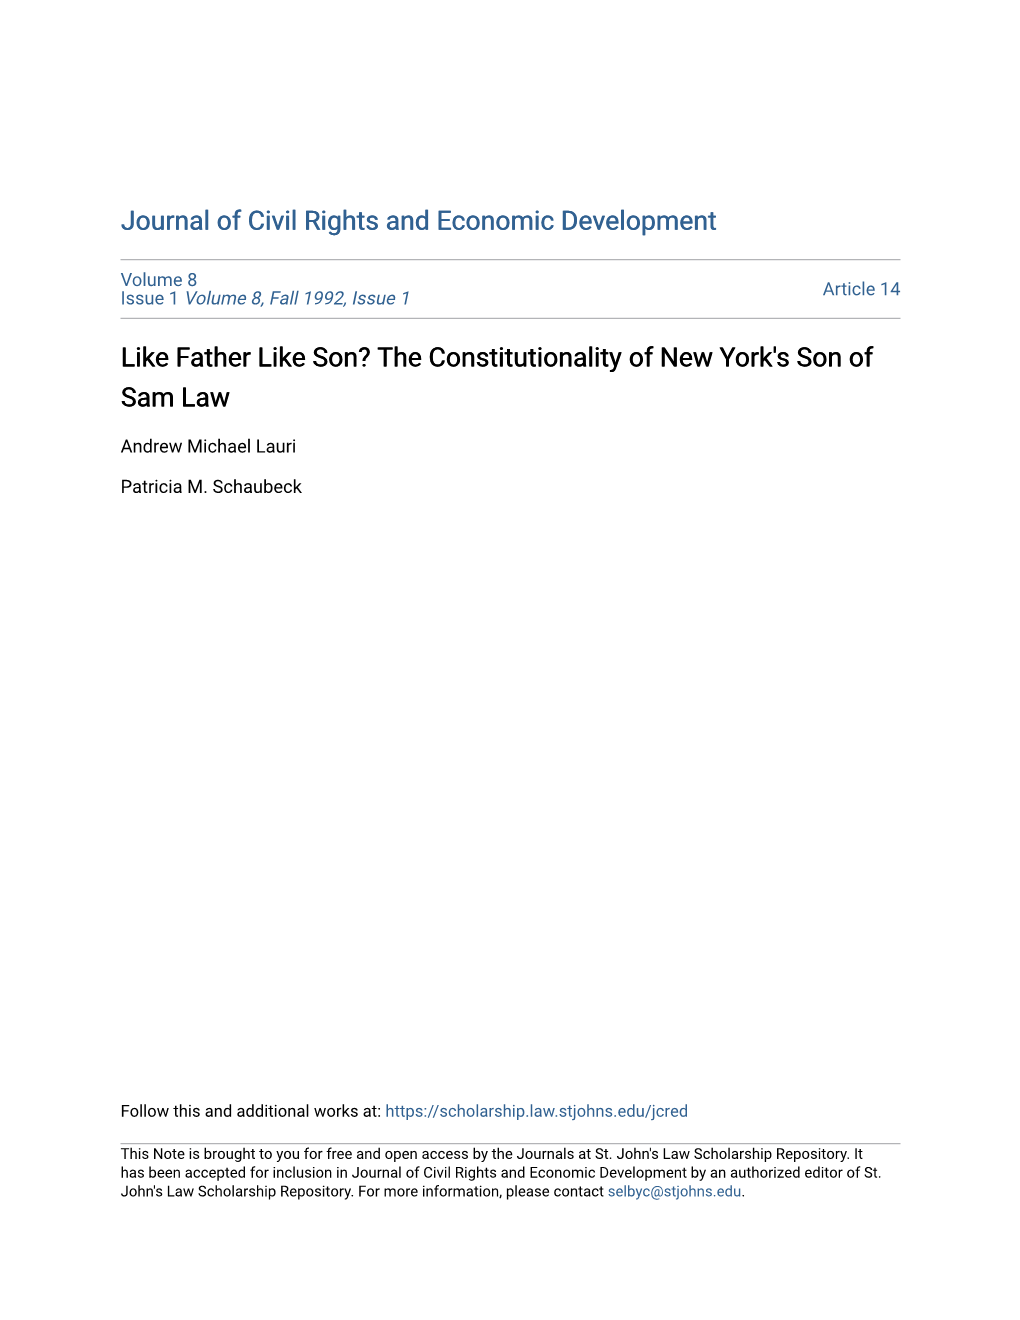 The Constitutionality of New York's Son of Sam Law